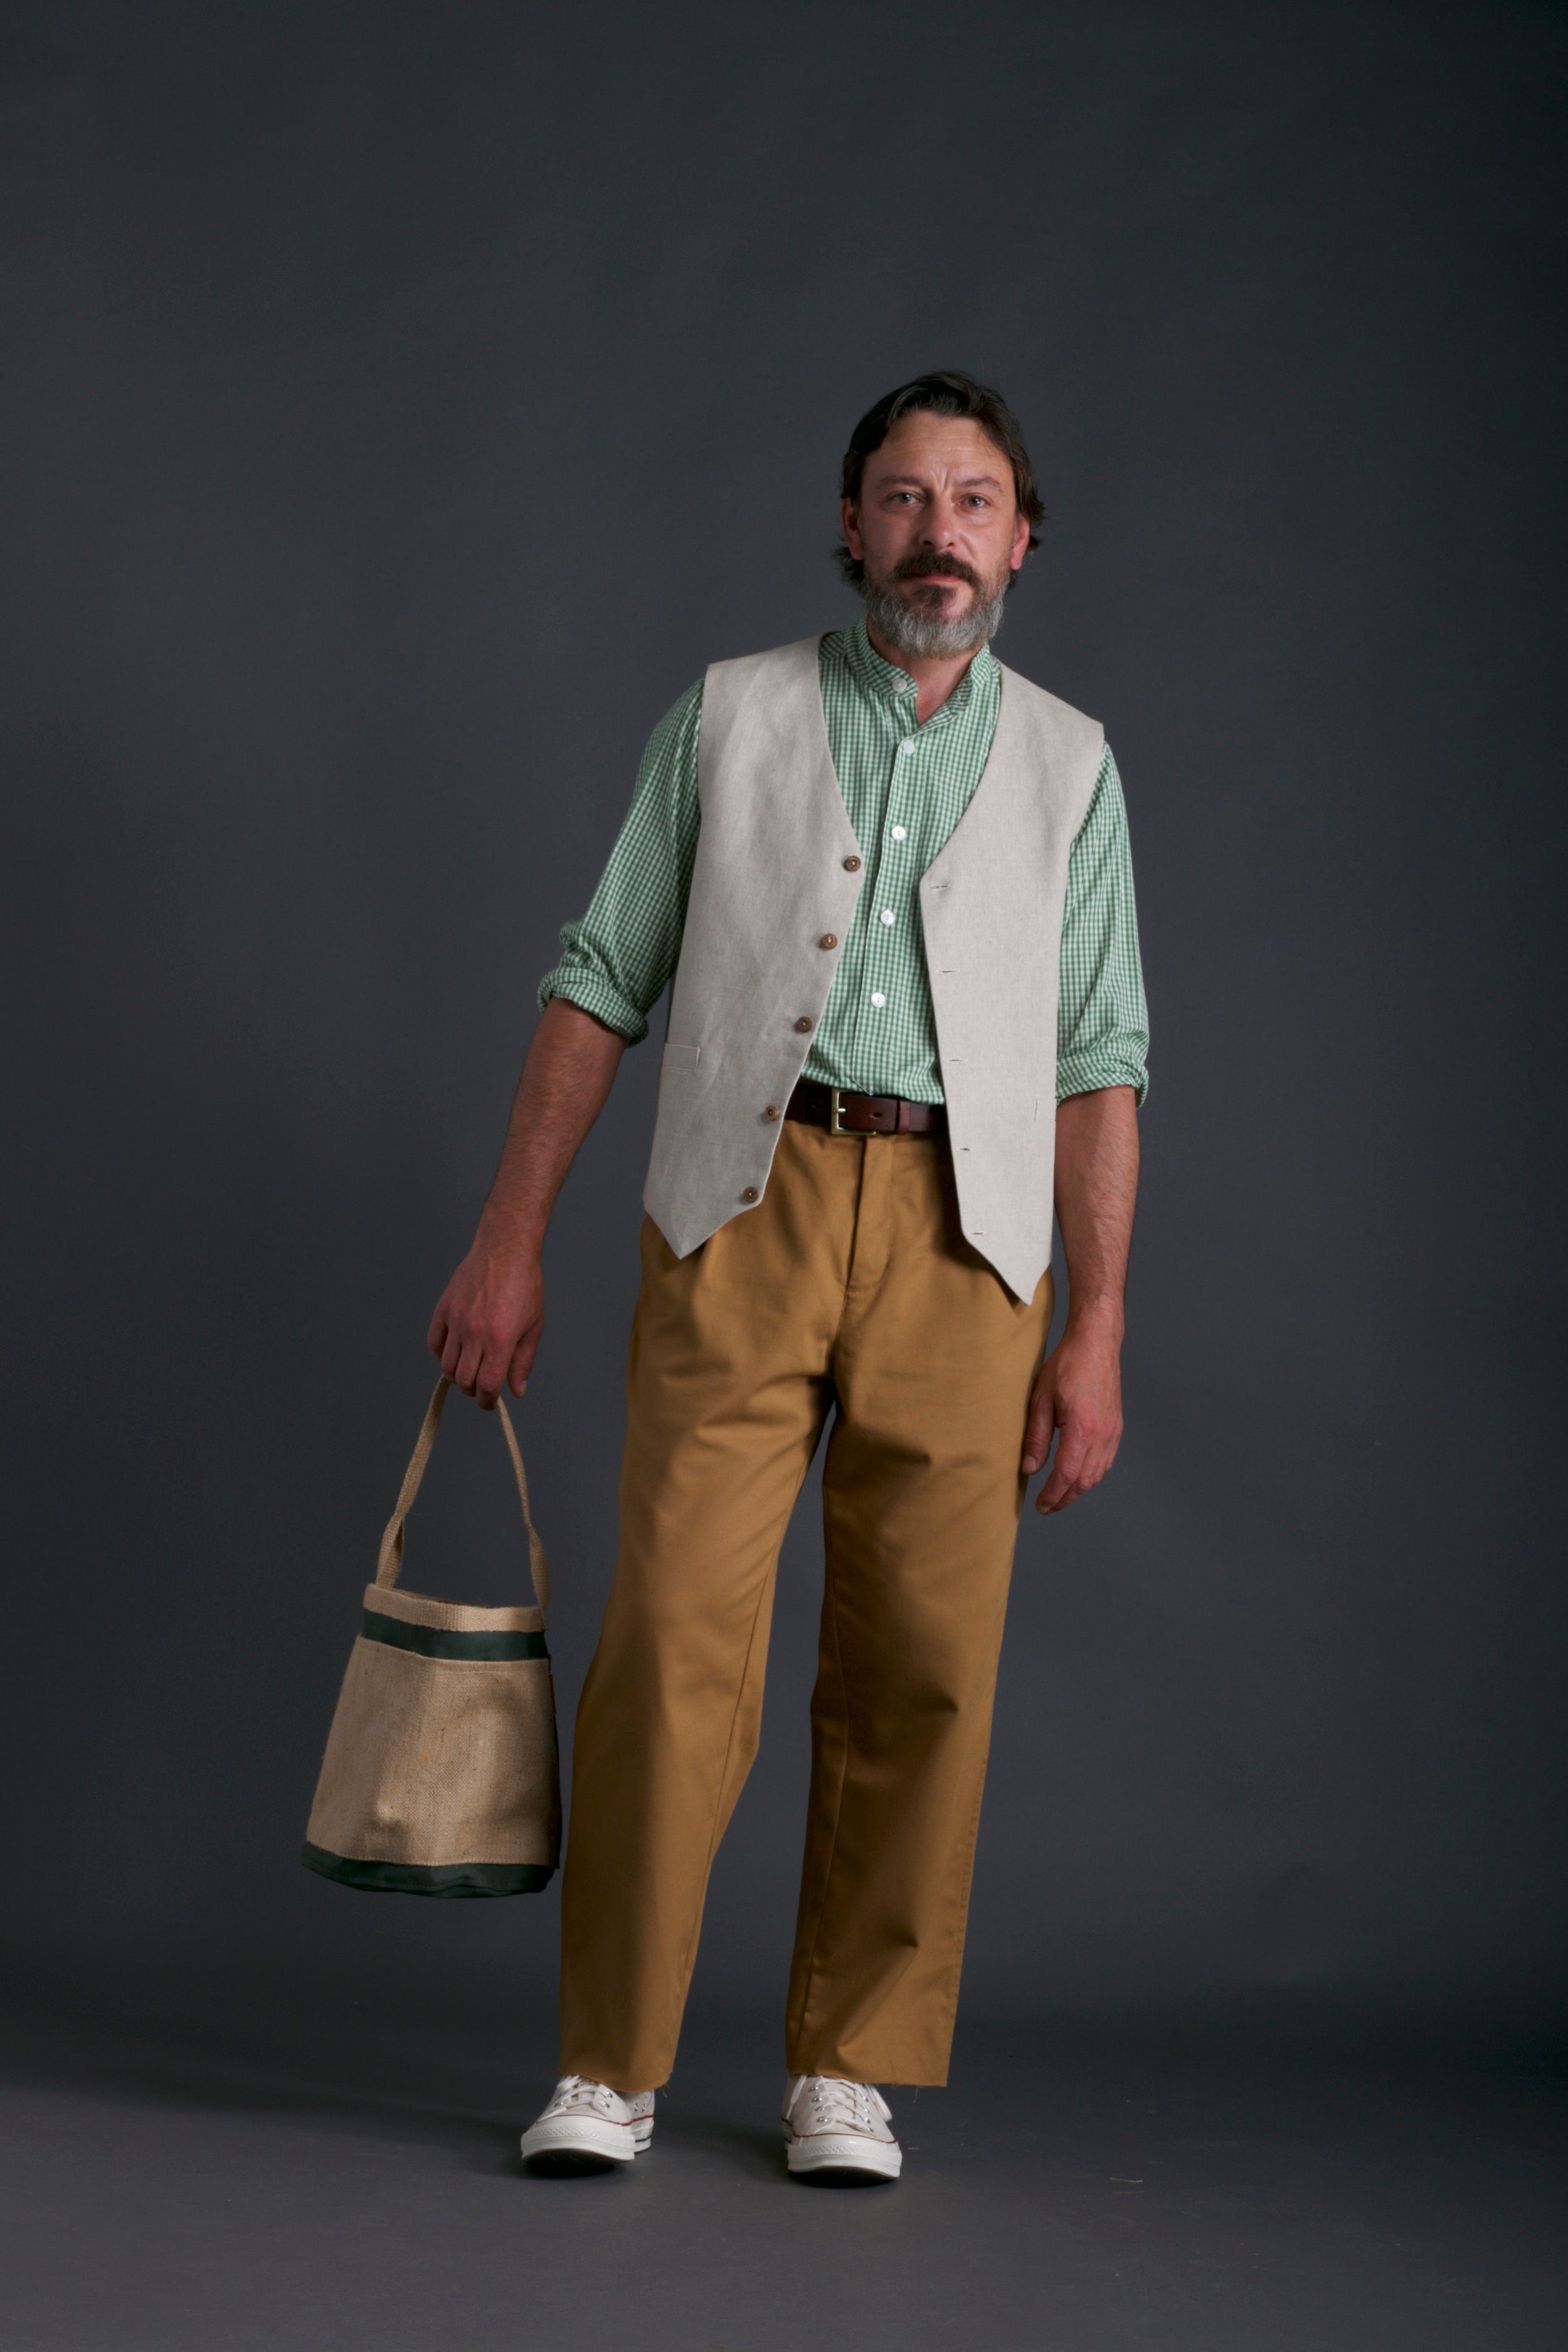 Man wears Carrier Company Men's Linen Waistcoat with Collarless Shirt in Green Gingham and Classic Trouser in Tan